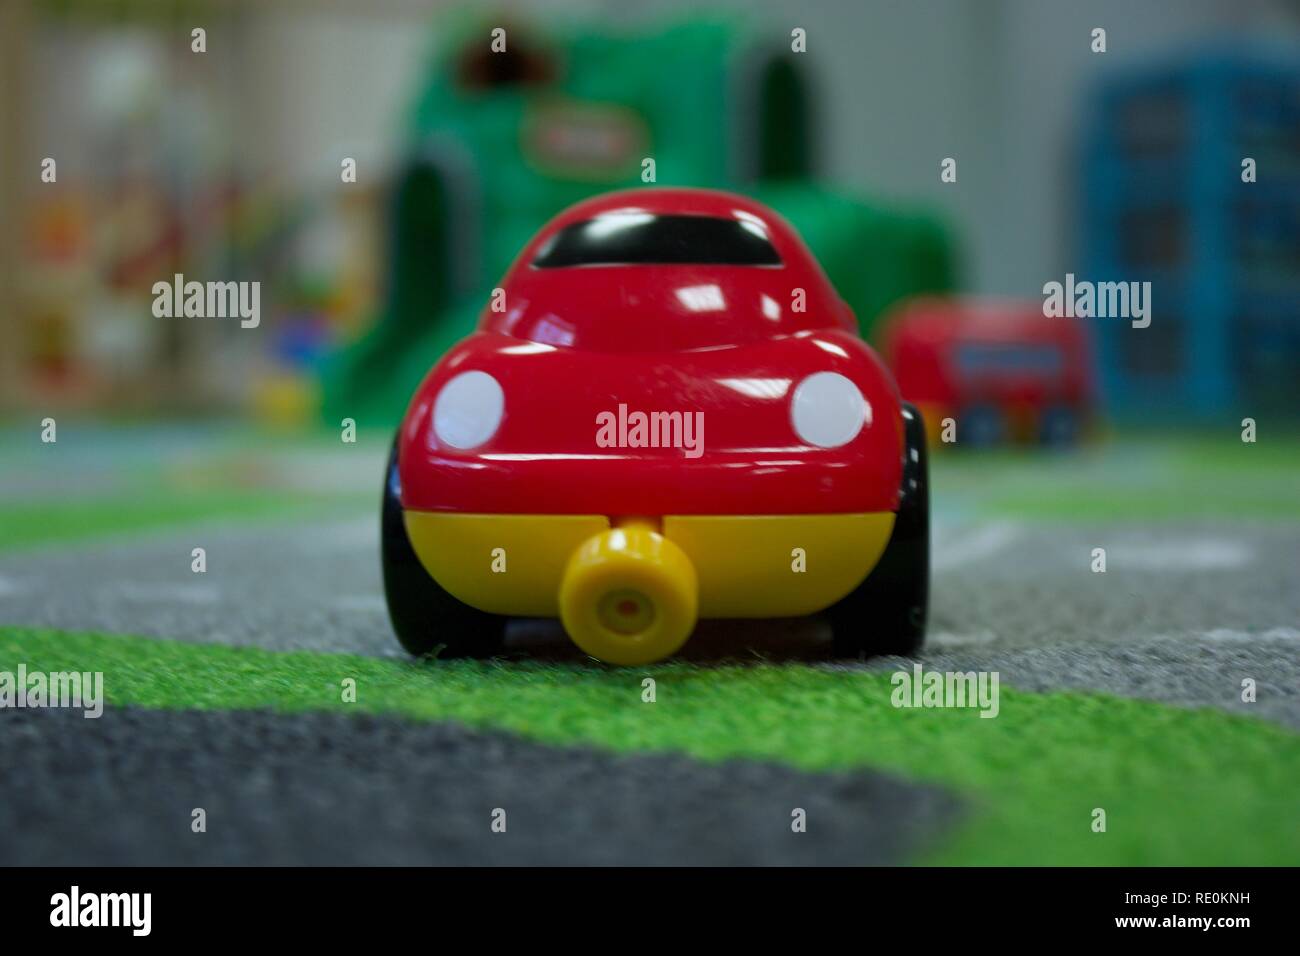 Bright red toy car on play mat Stock Photo